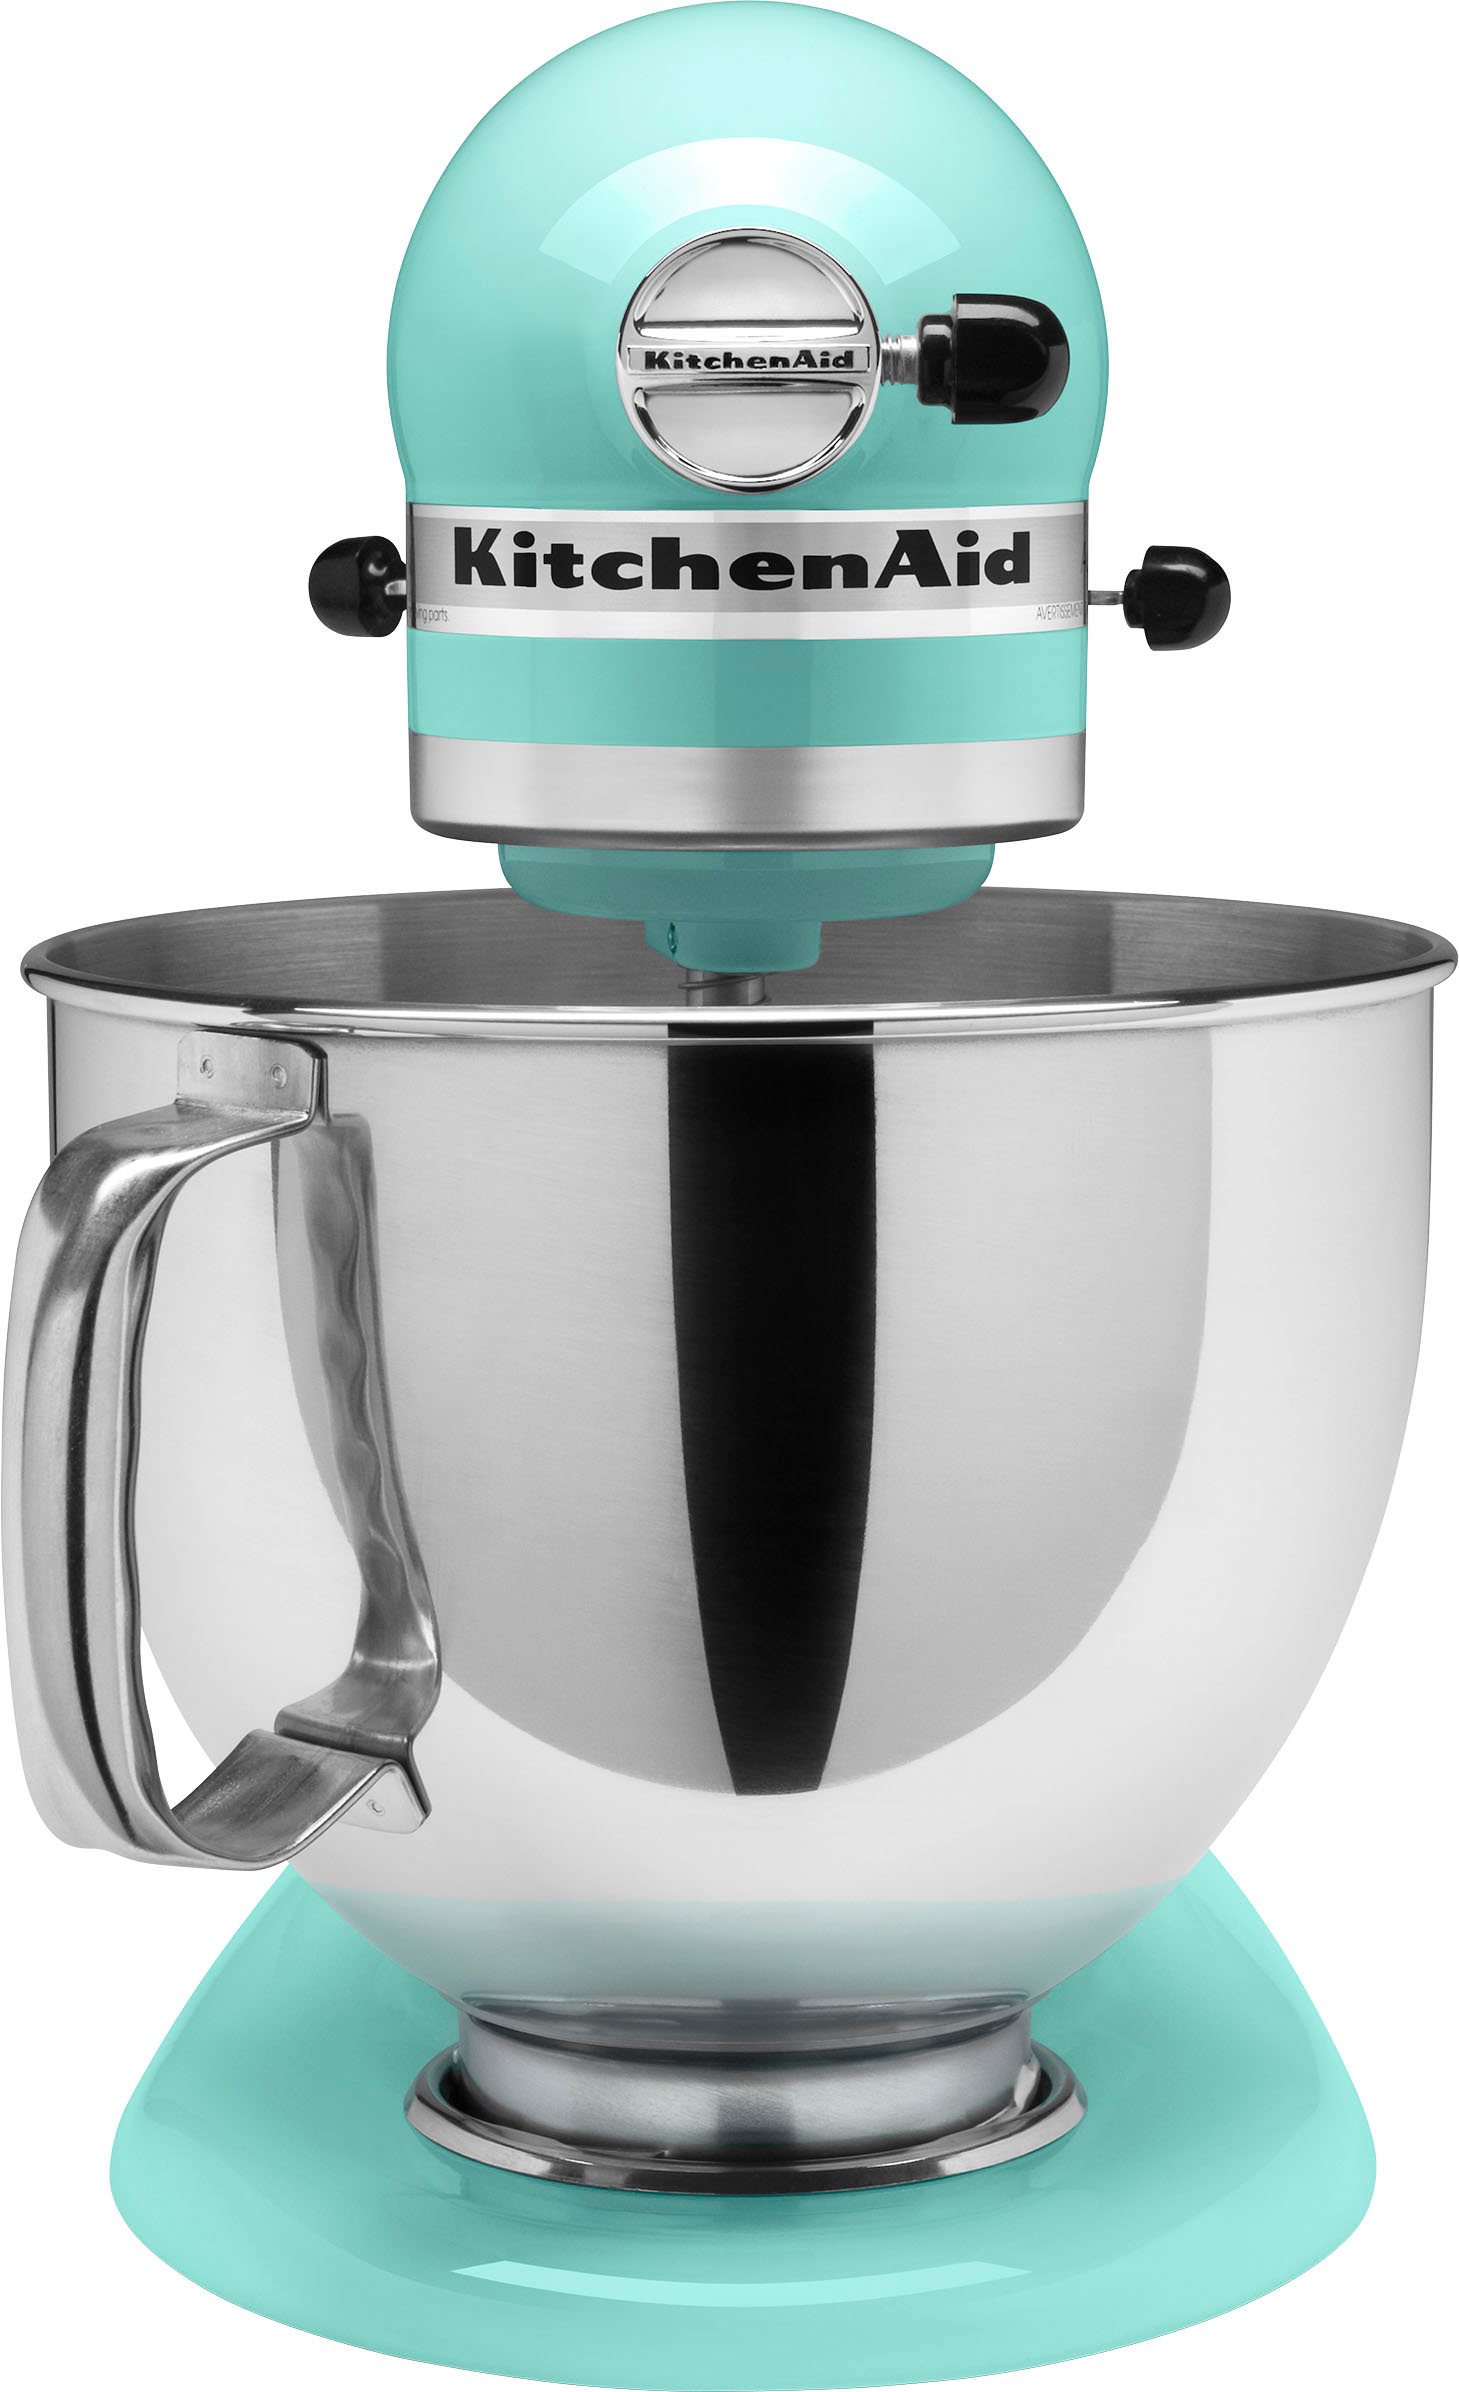 Spend $400 or $179? Head to head review of KitchenAid Artisan vs. Aucma  Stand mixer 